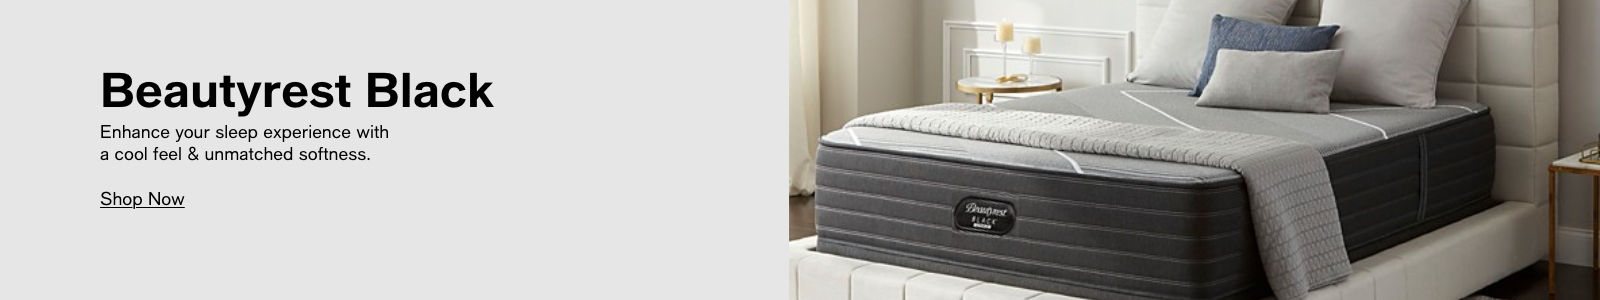 Beautyrest Back, Enhance your sleep experience with a cool feel and unmatched softness